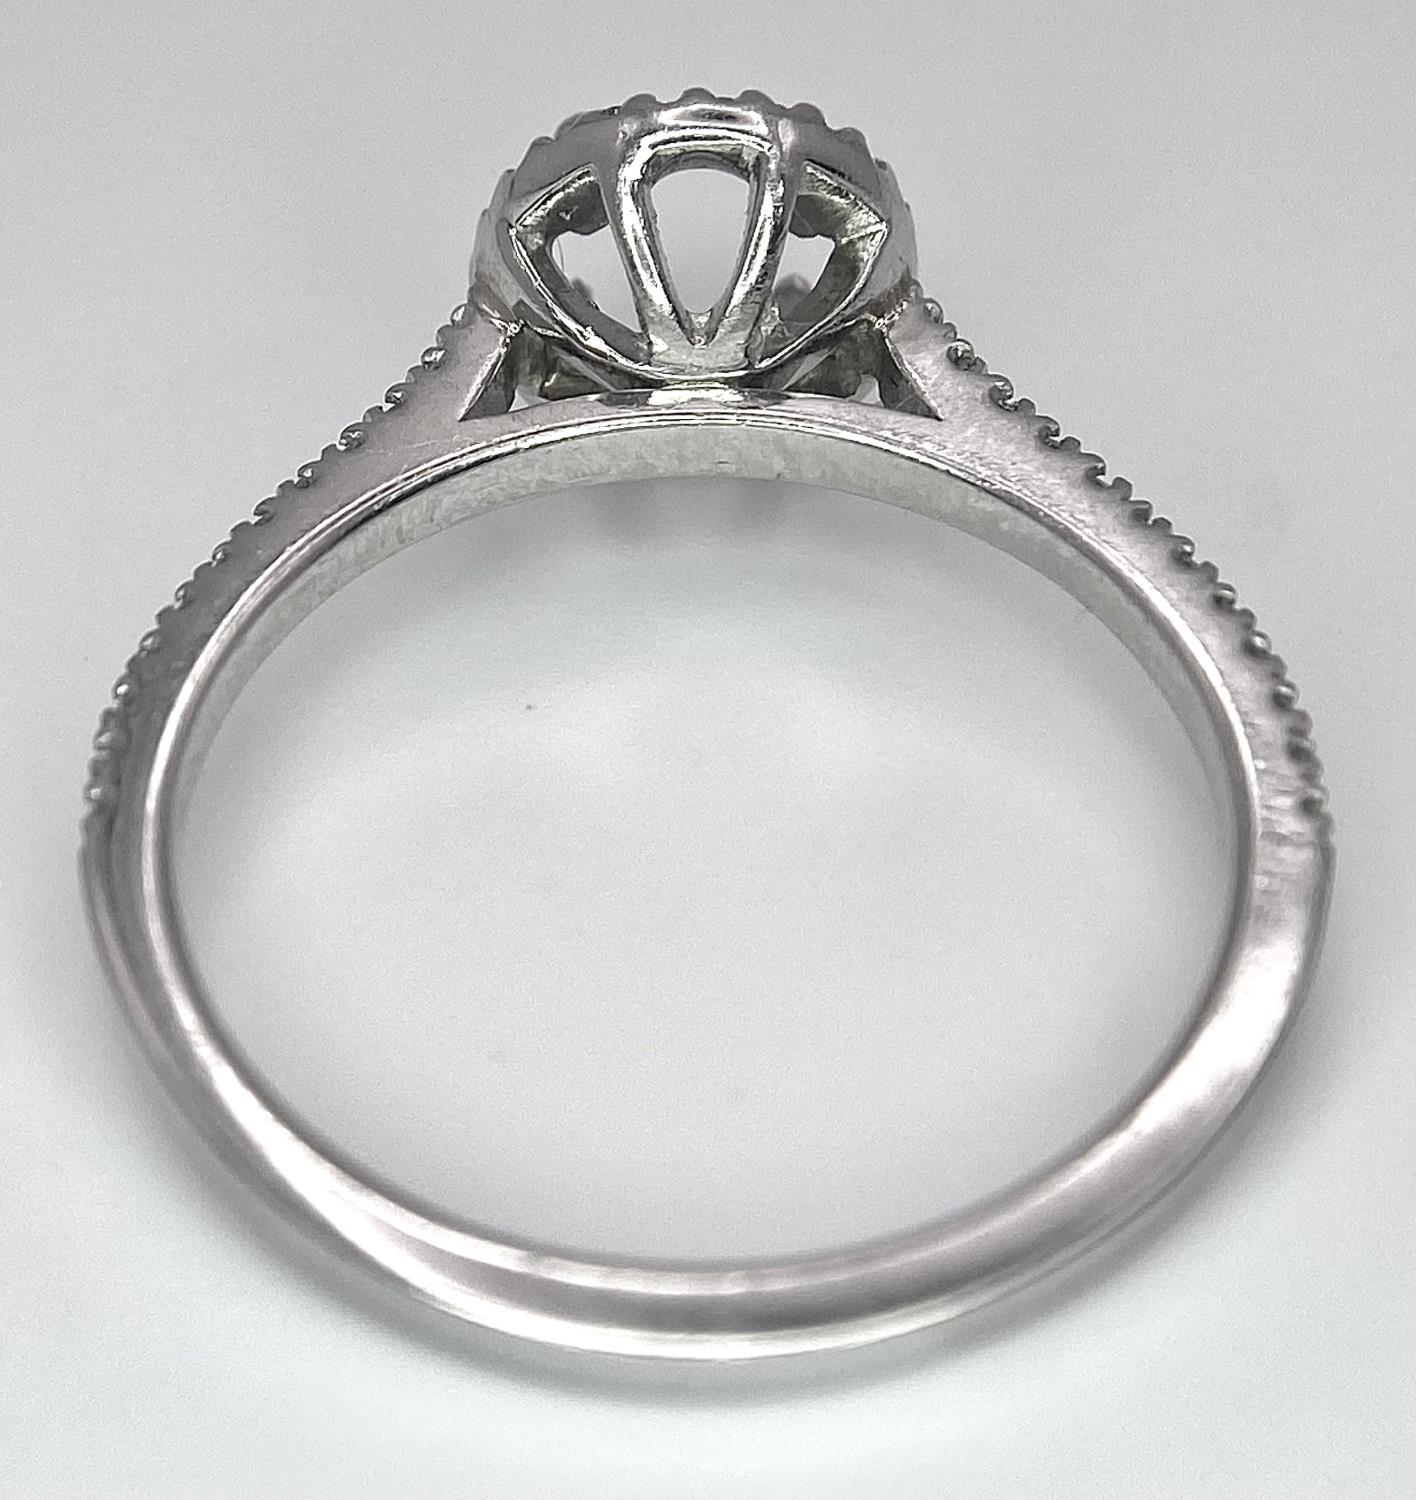 A PLATINUM DIAMOND SET HALO AND SHOULDERS RING MOUNT 0.40CT, READY TO SET YOUR DREAM GEMSTONE 4.3G - Image 5 of 6